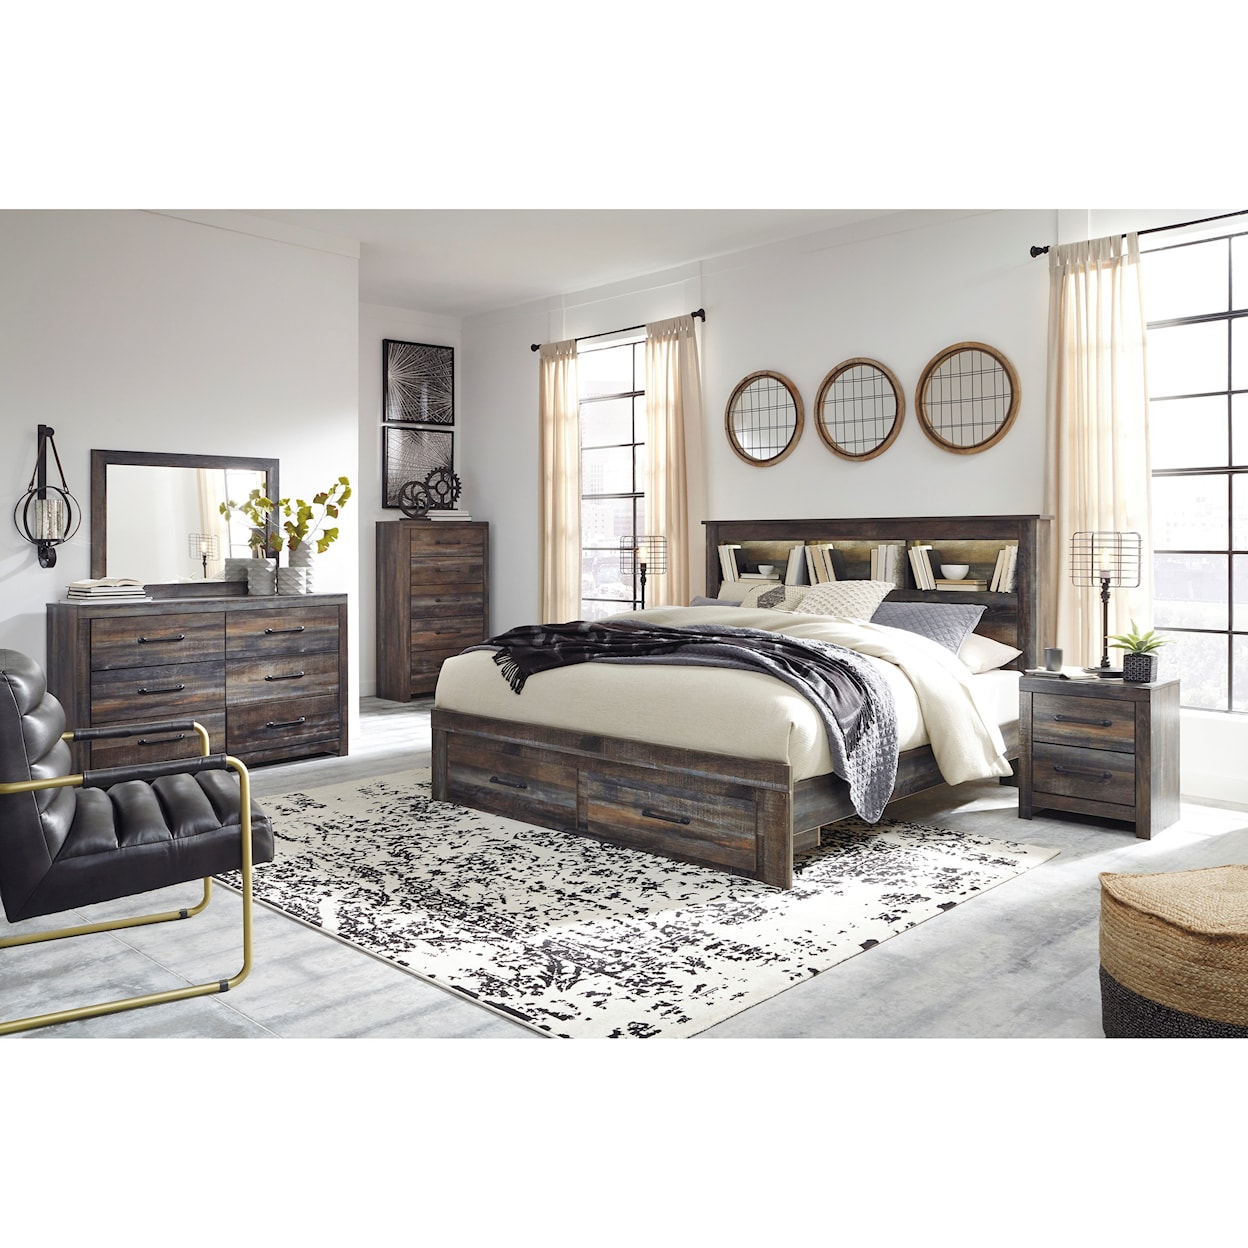 Signature Design by Ashley Drystan King Bedroom Group